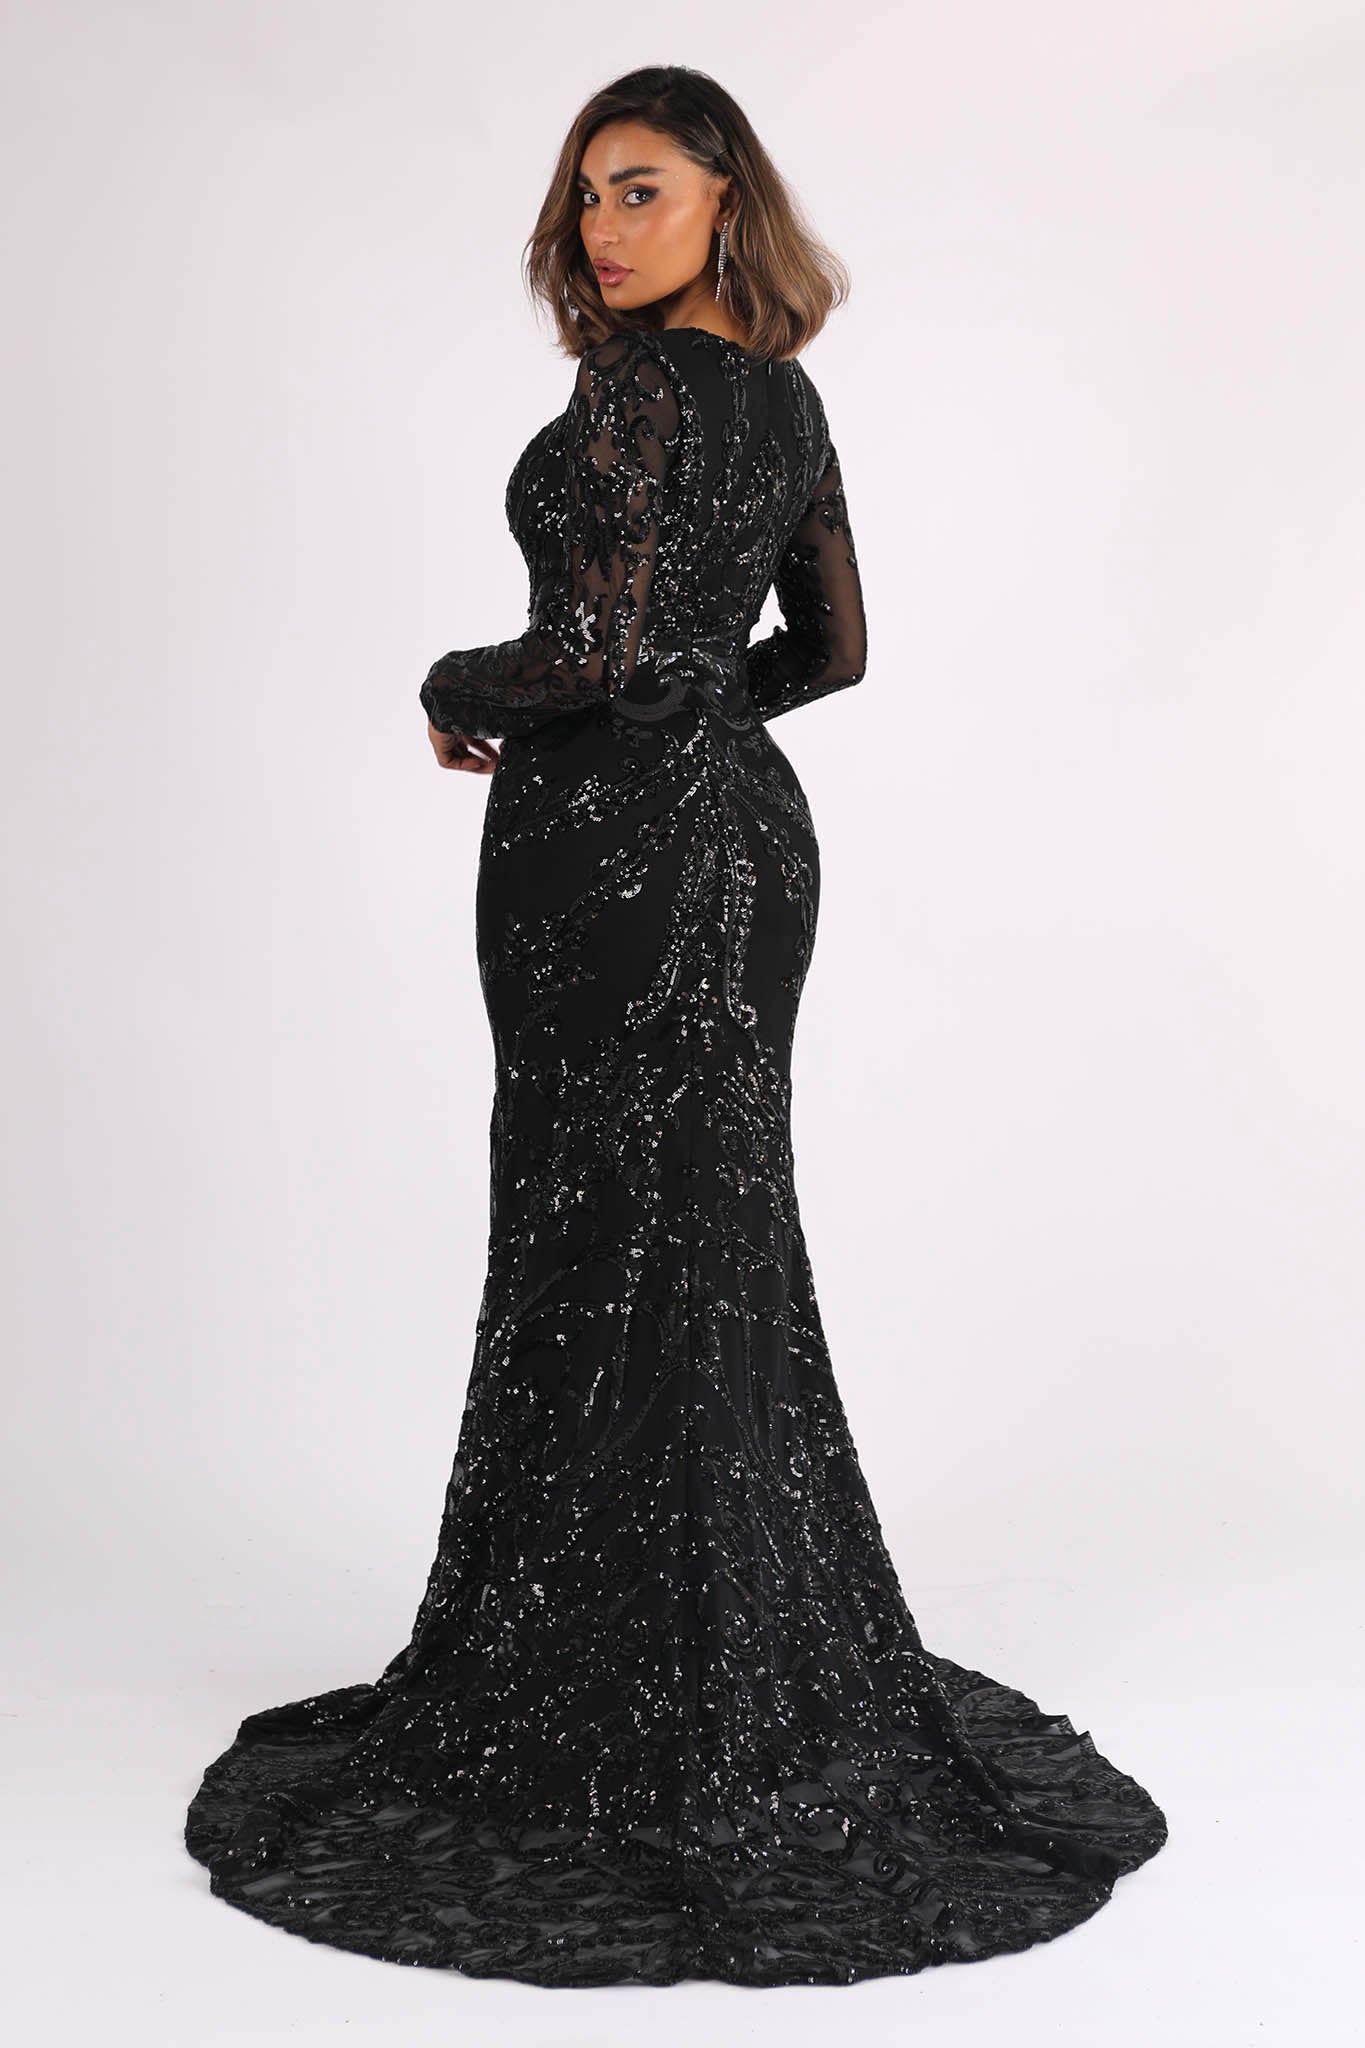 Custom Made Black Mermaid Evening Gown With Sequined Side Split And Long  Sleeves Slim Fit For Womens Black Sequin Evening Dress From Meetyy, $53.13  | DHgate.Com